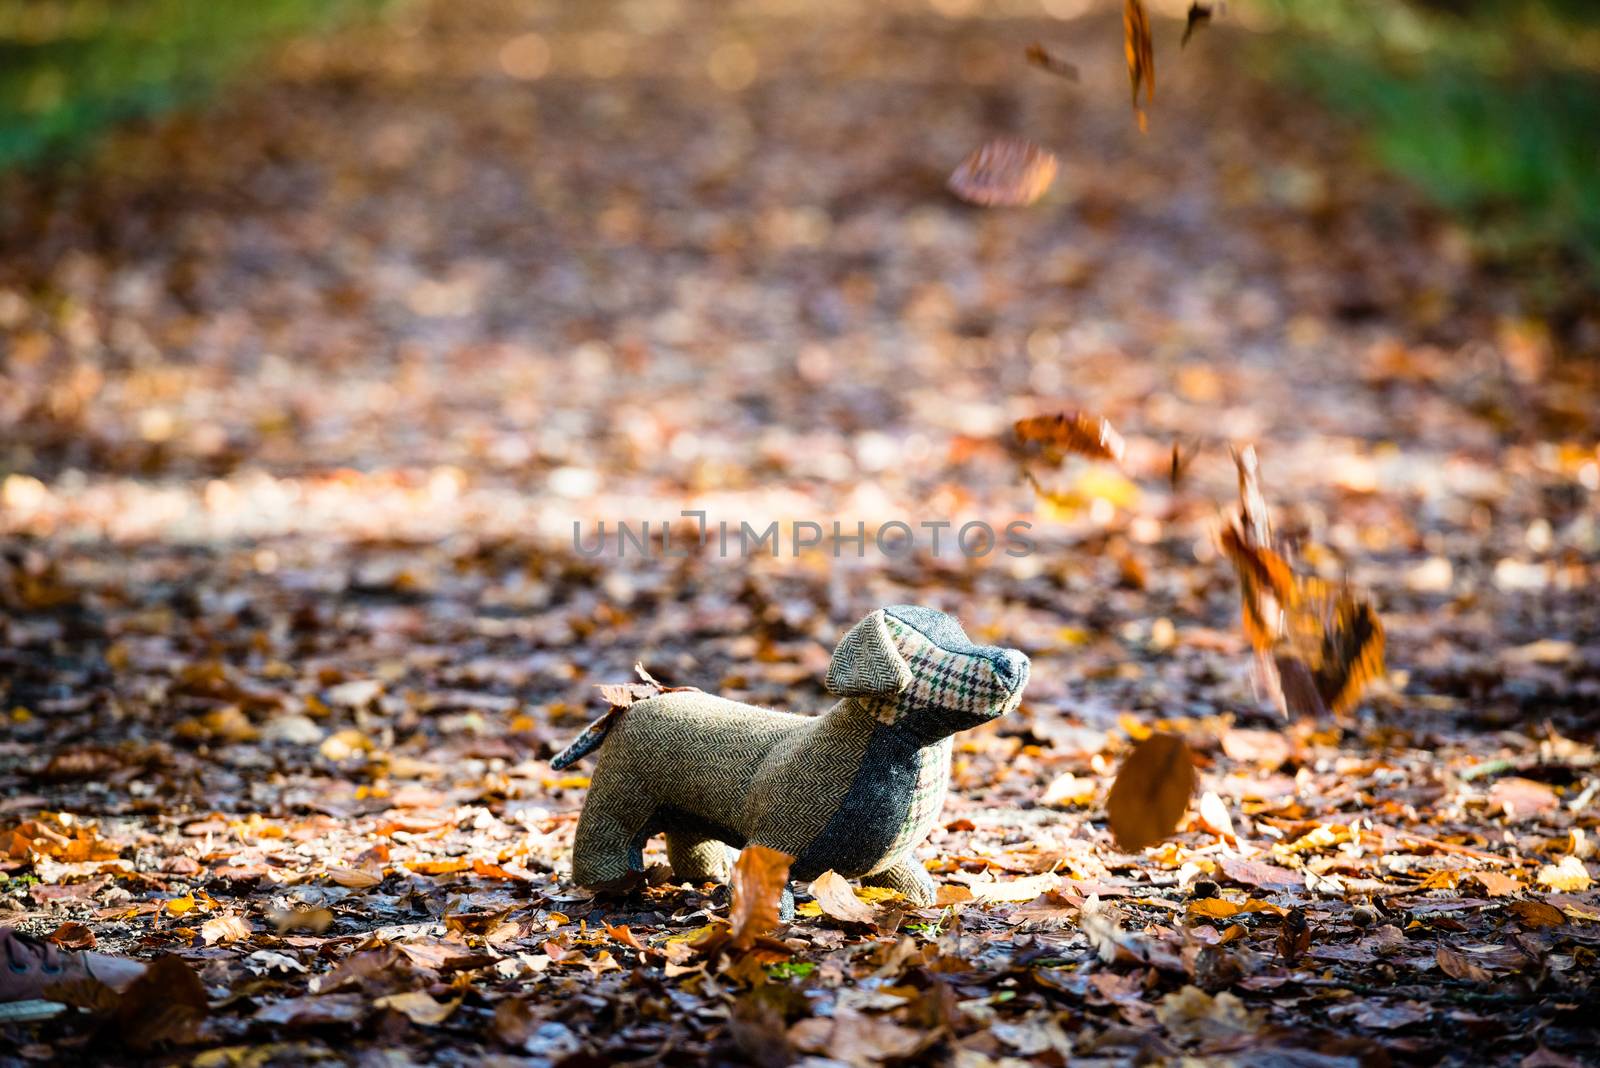 A handmade soft toy dog is placed on an autumn forest floor covered with fallen leaves